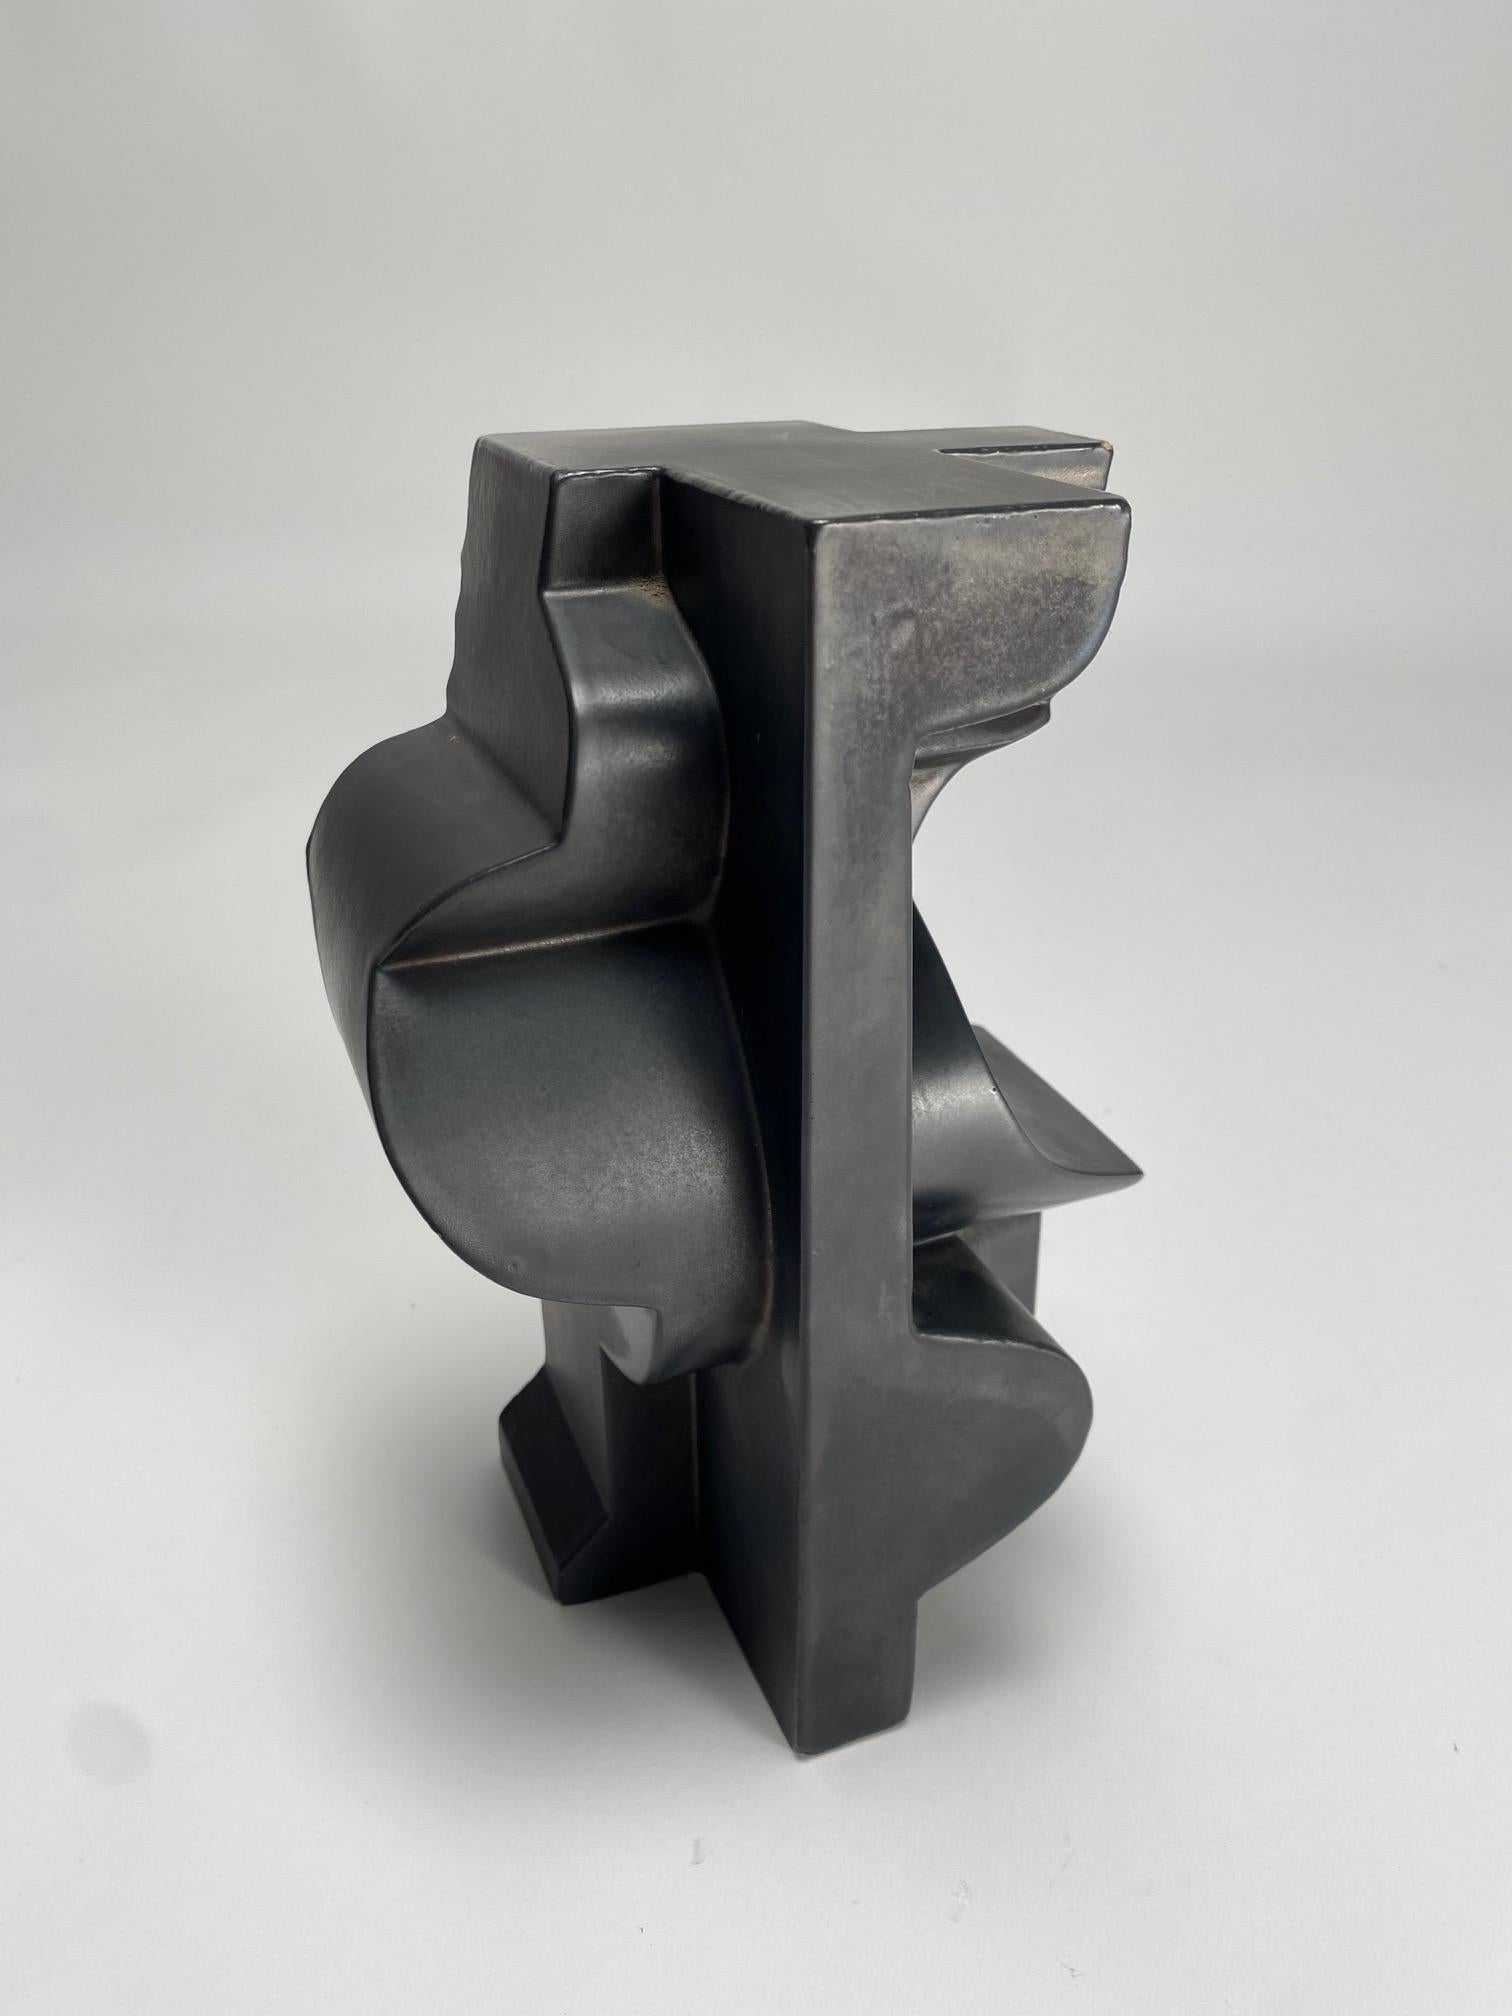 Glazed Nino Caruso, Abstract sculpture in glazed ceramic, Italy, 1974 For Sale